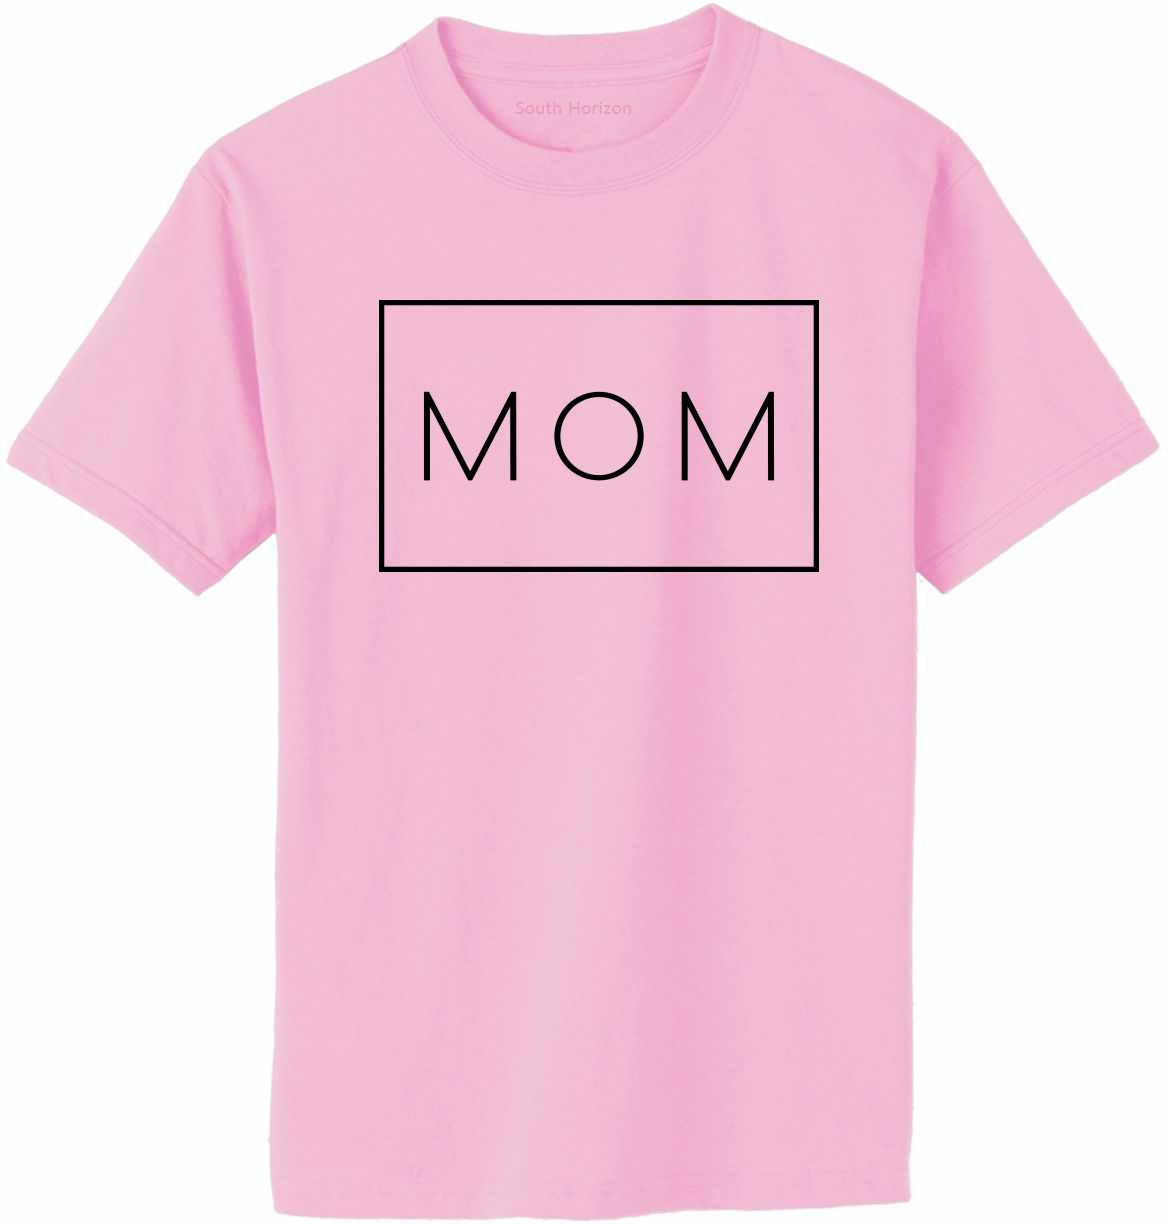 MOM - MOMMY Boxed on Adult T-Shirt